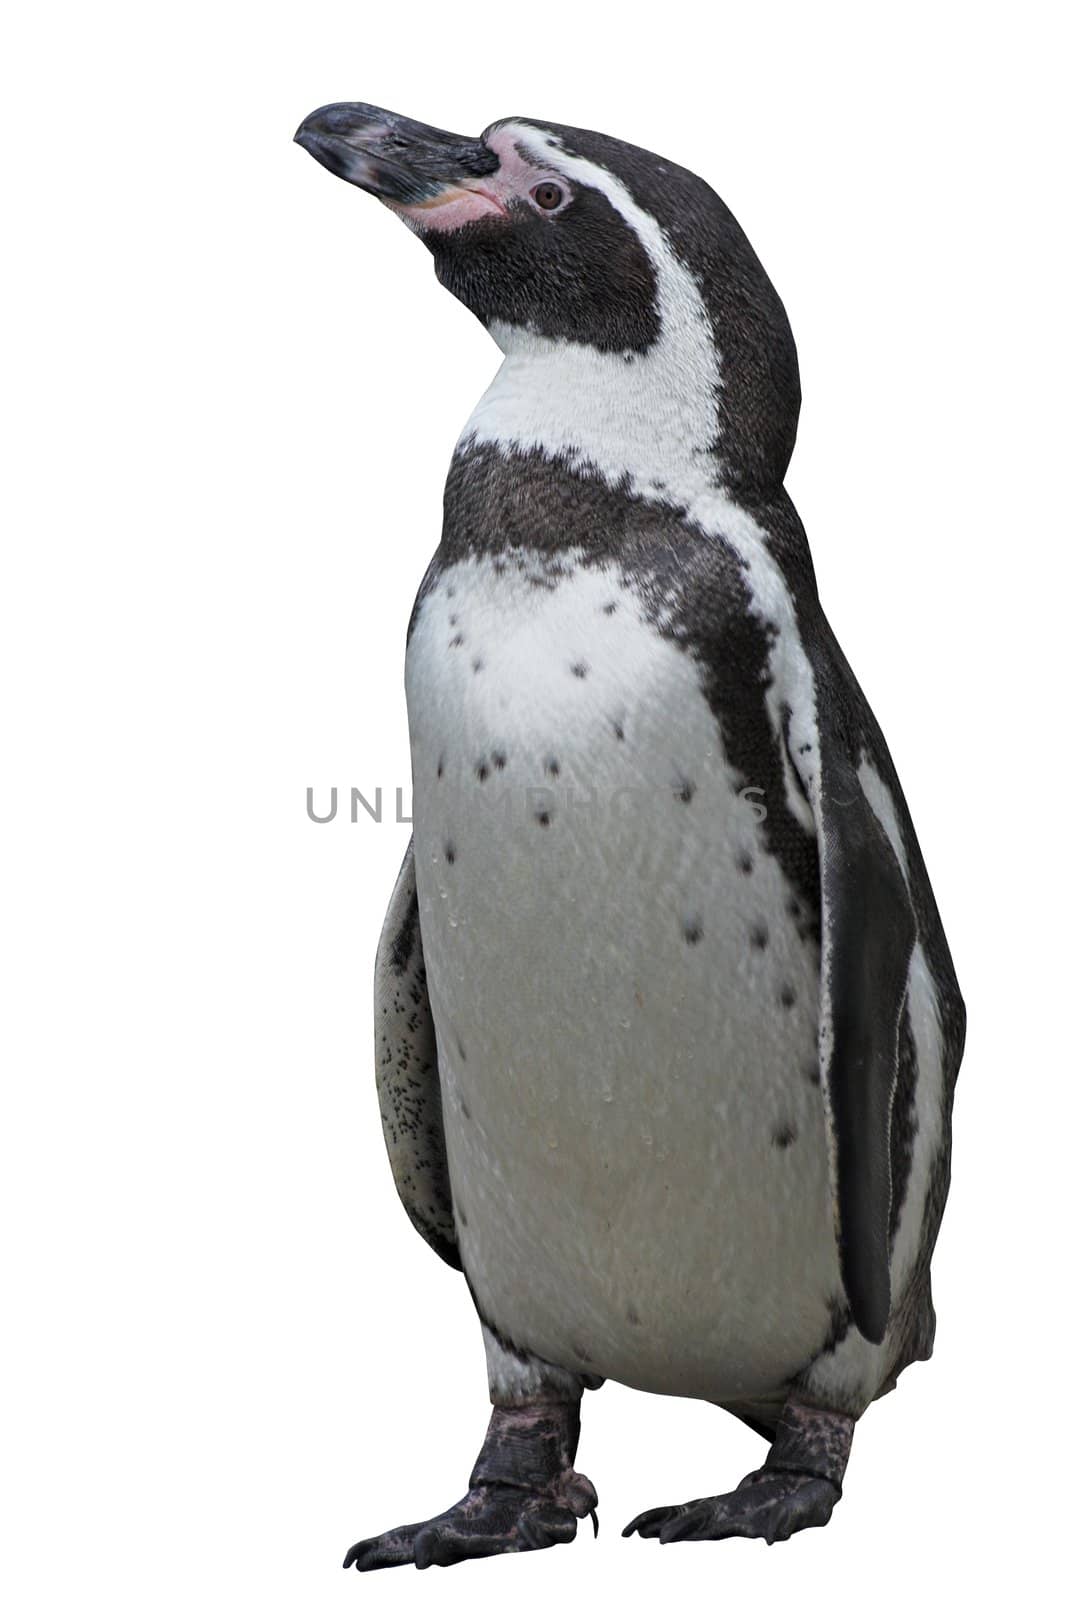 A young Humboldt penguin standing upright With clipping path